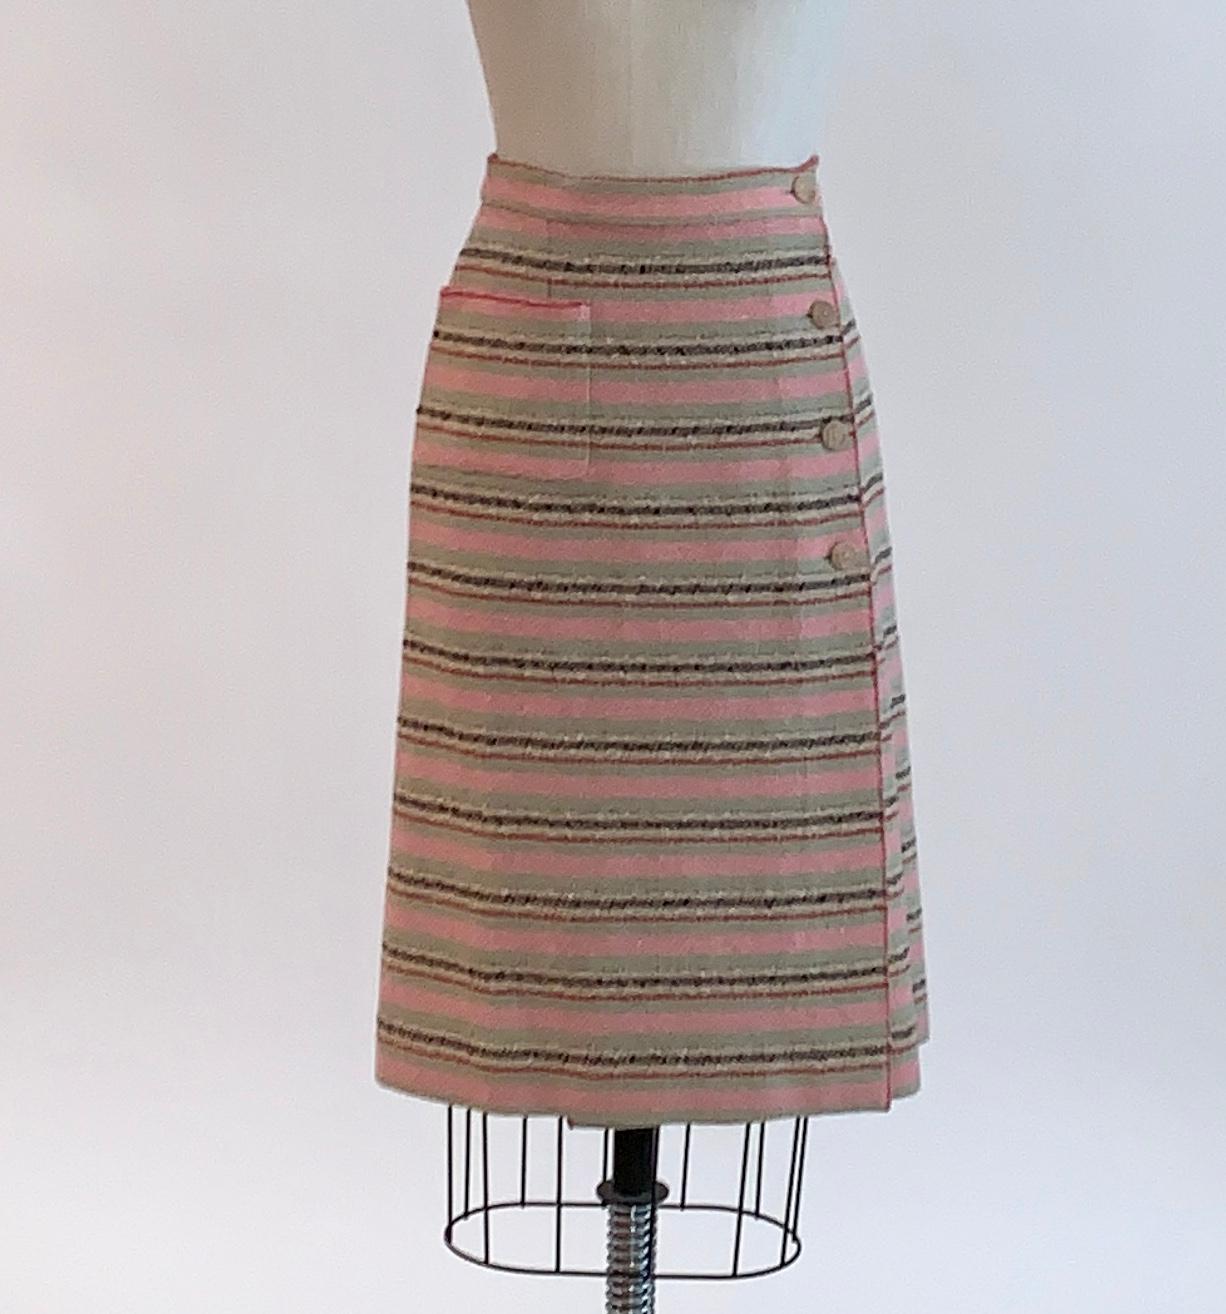 Chanel tweed pencil skirt in muted pink, sage green, natural, and red stripes. Branded 'Chanel, Paris' on wooden buttons at front. Side and back patch pockets. 

80% Wool, 20% Nylon. Unlined.

Made in France.   

Size FR 40, approximate US 8, see